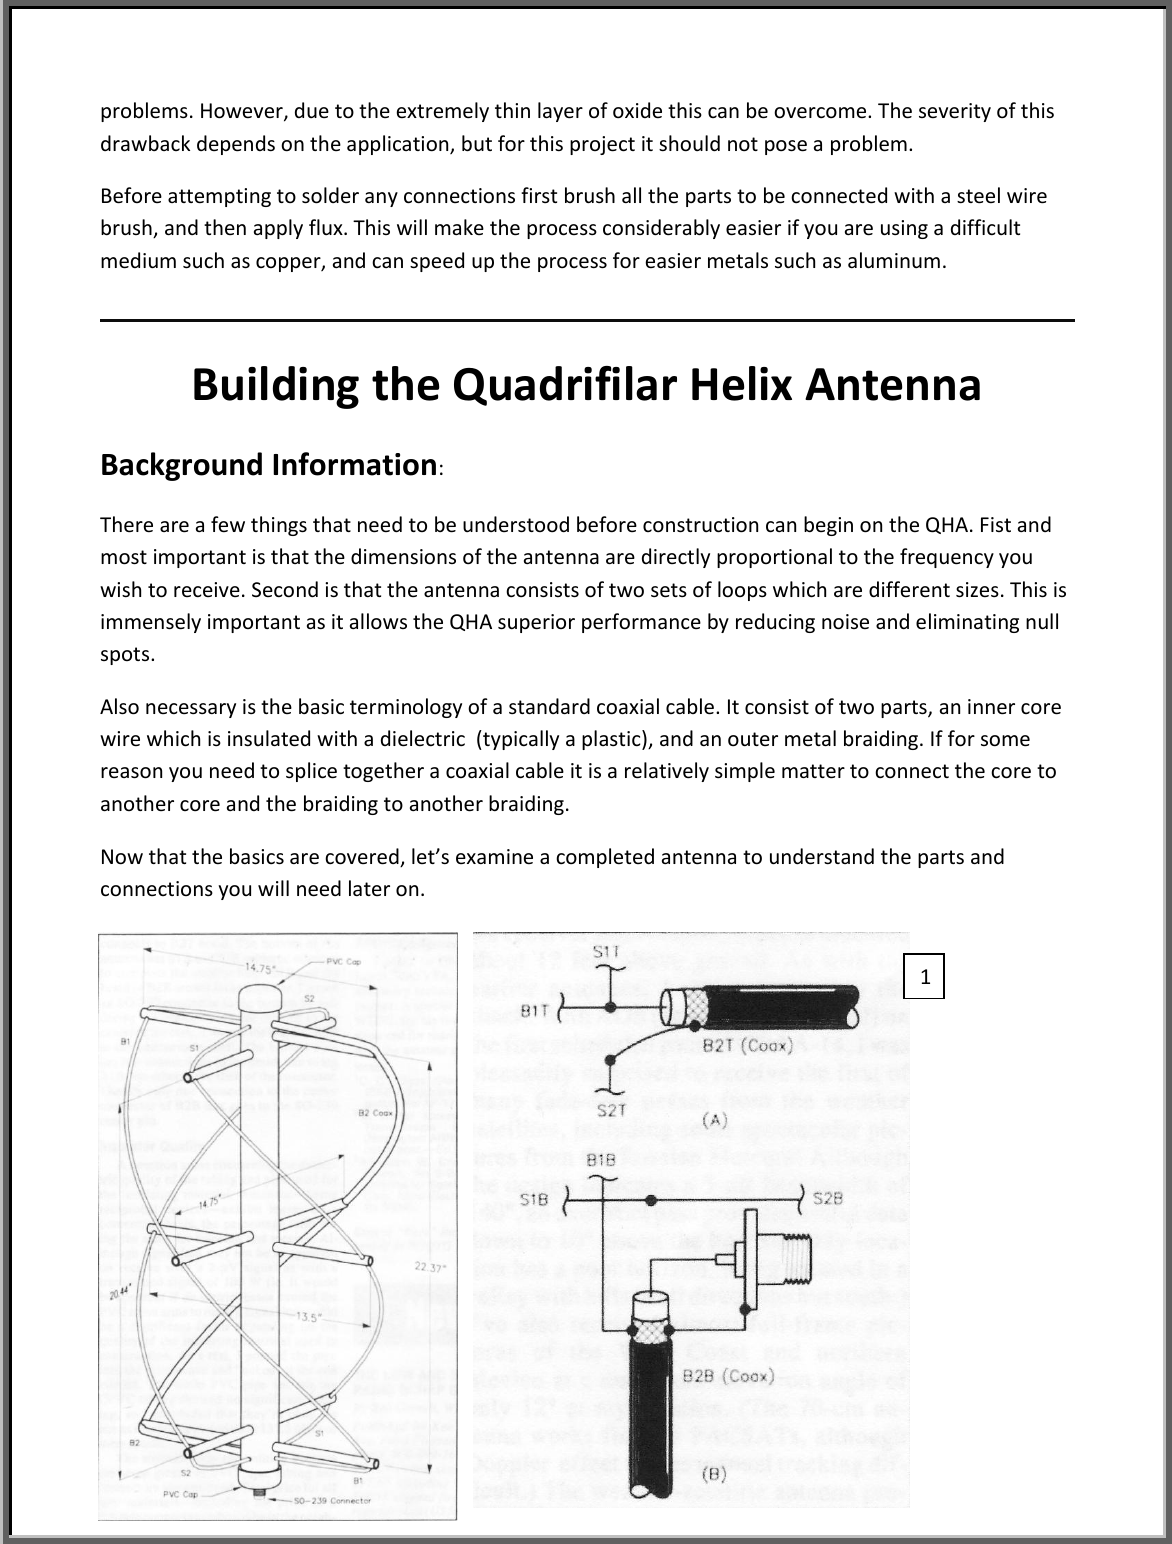 Page 4 of 11 - Building QFH Antenna Guide